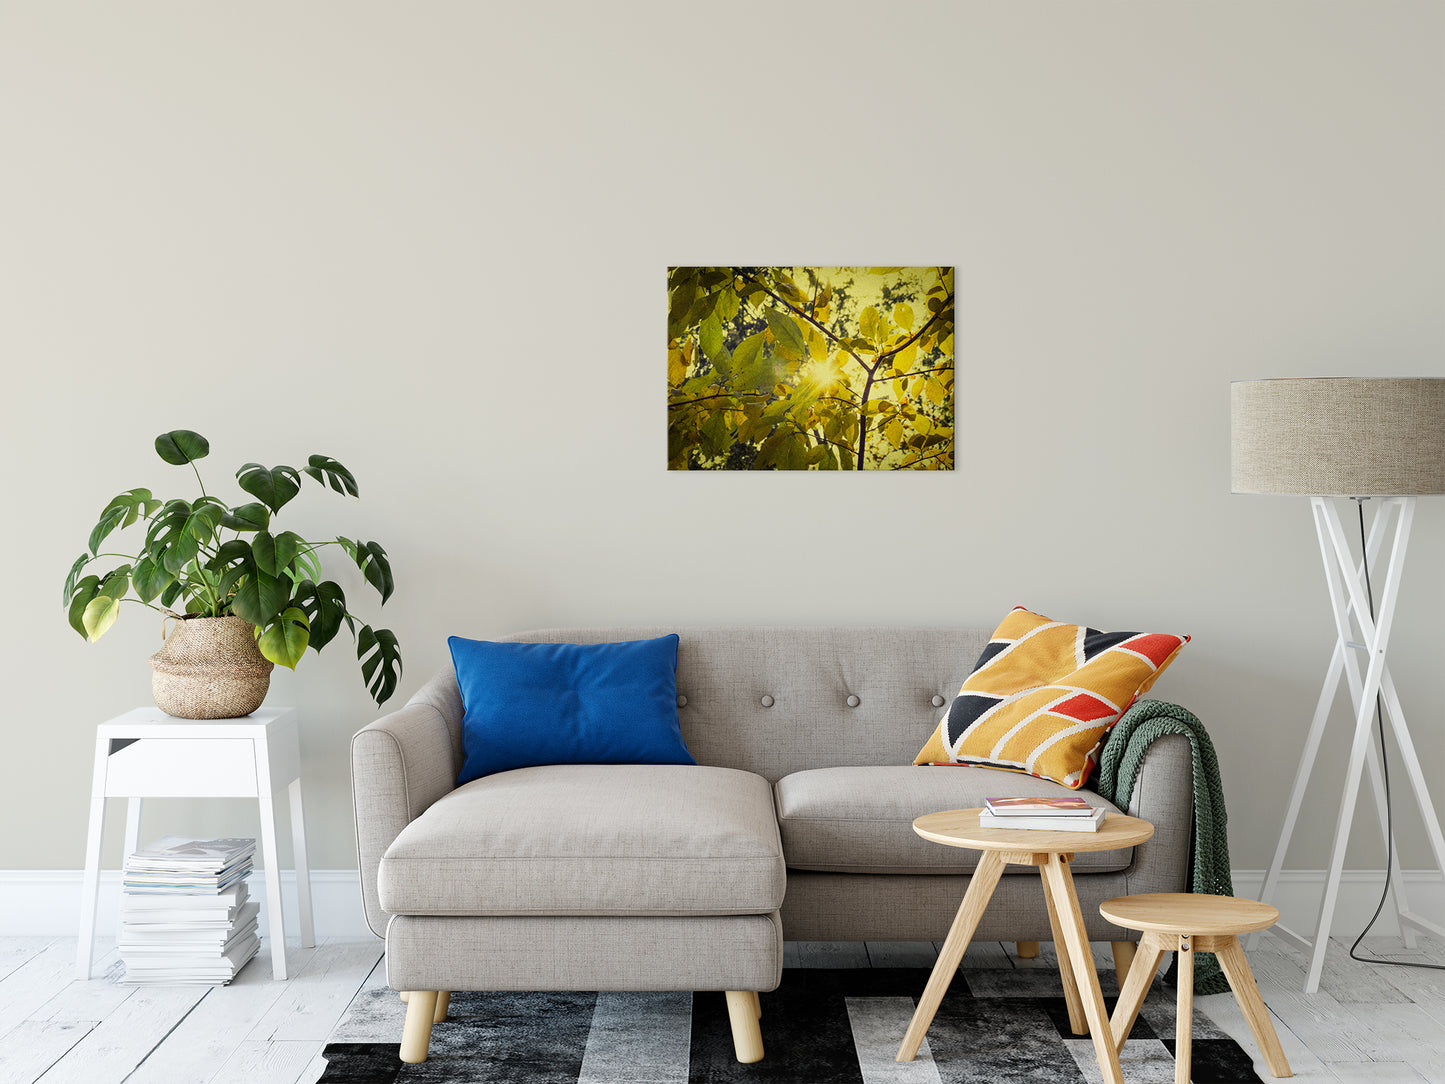 Leaf Art Wall: Aged Golden Leaves Botanical / Nature Photo Fine Art Canvas Wall Art Prints 20" x 30" - PIPAFINEART